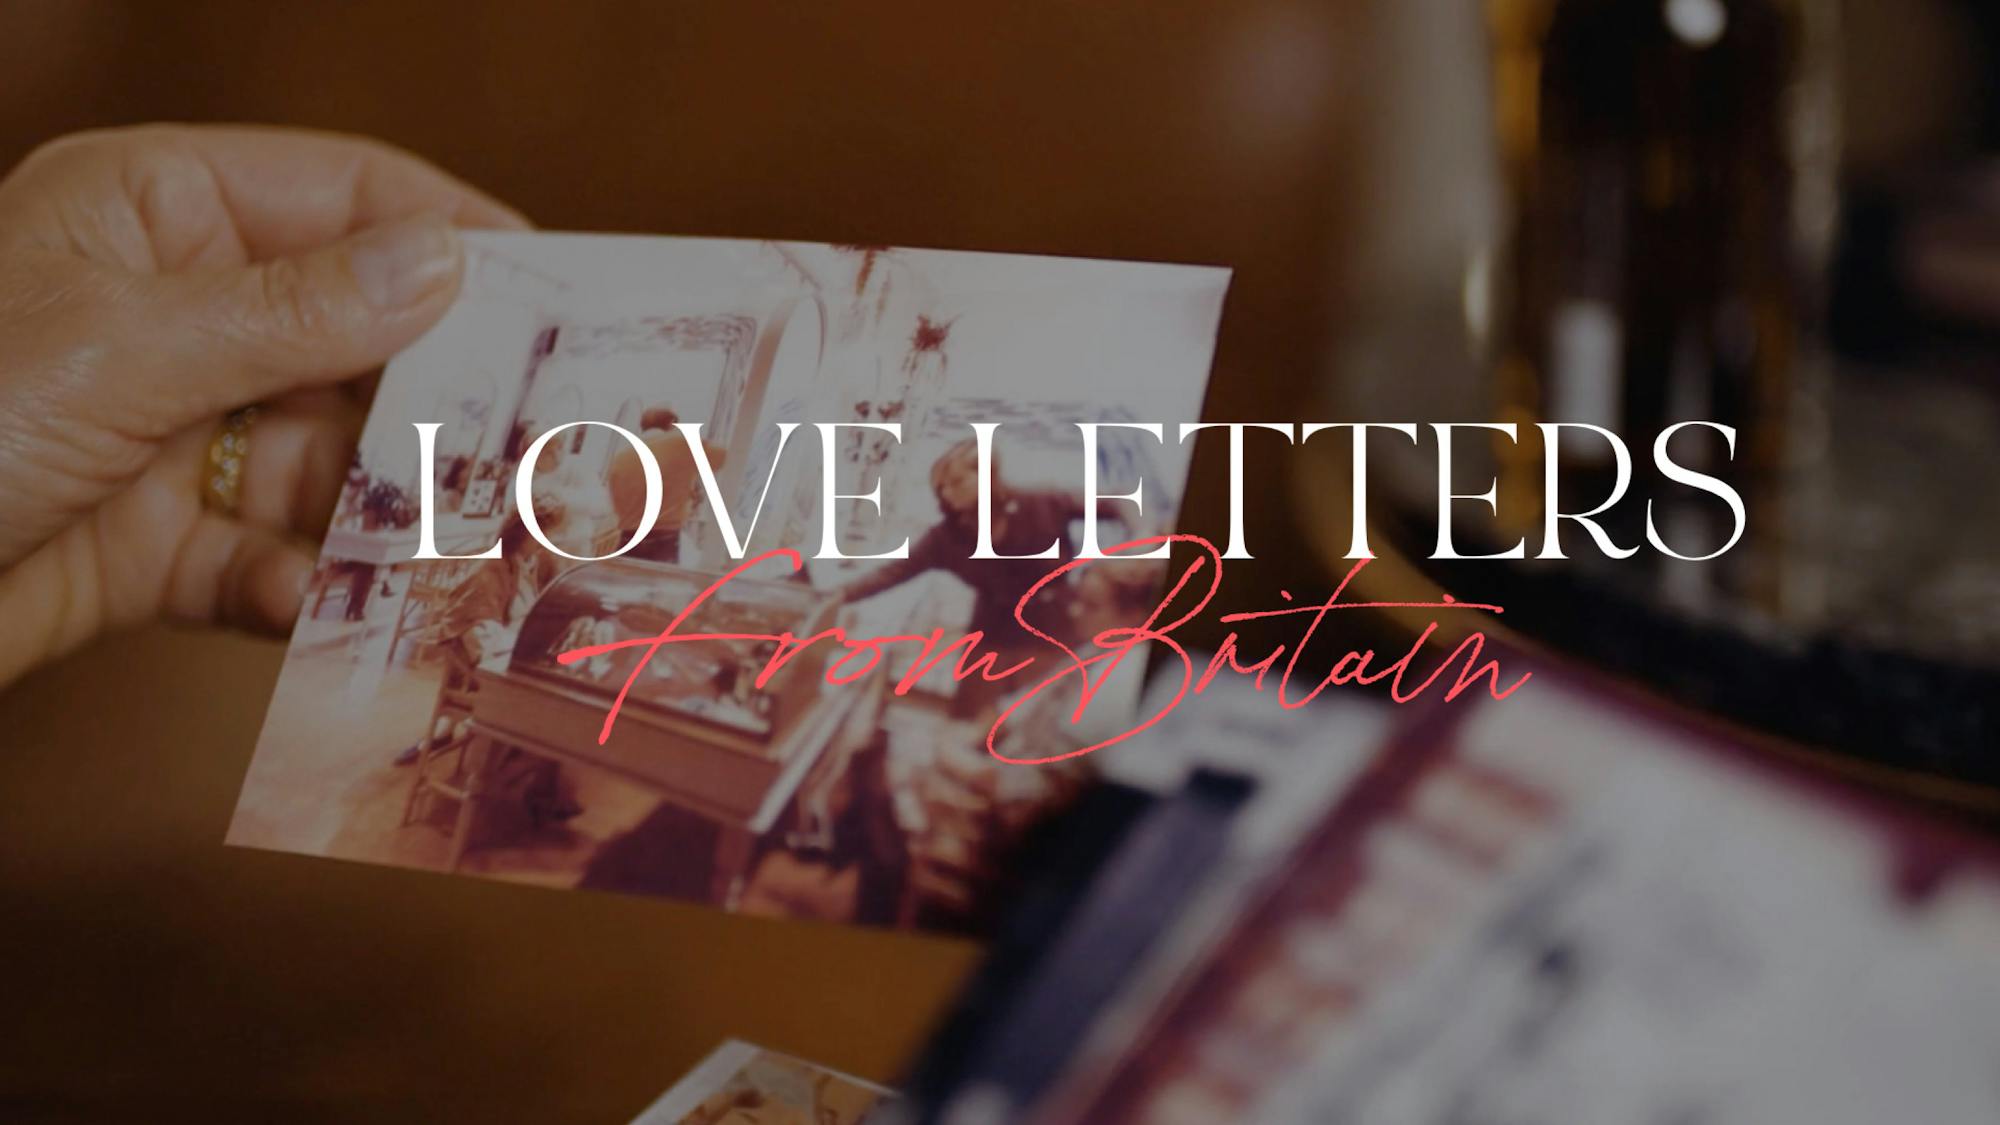 Launching today Love Letters From Britain A new series of short documentary-style films uncovering the untold stories of UK’s most innovative luxury brands.